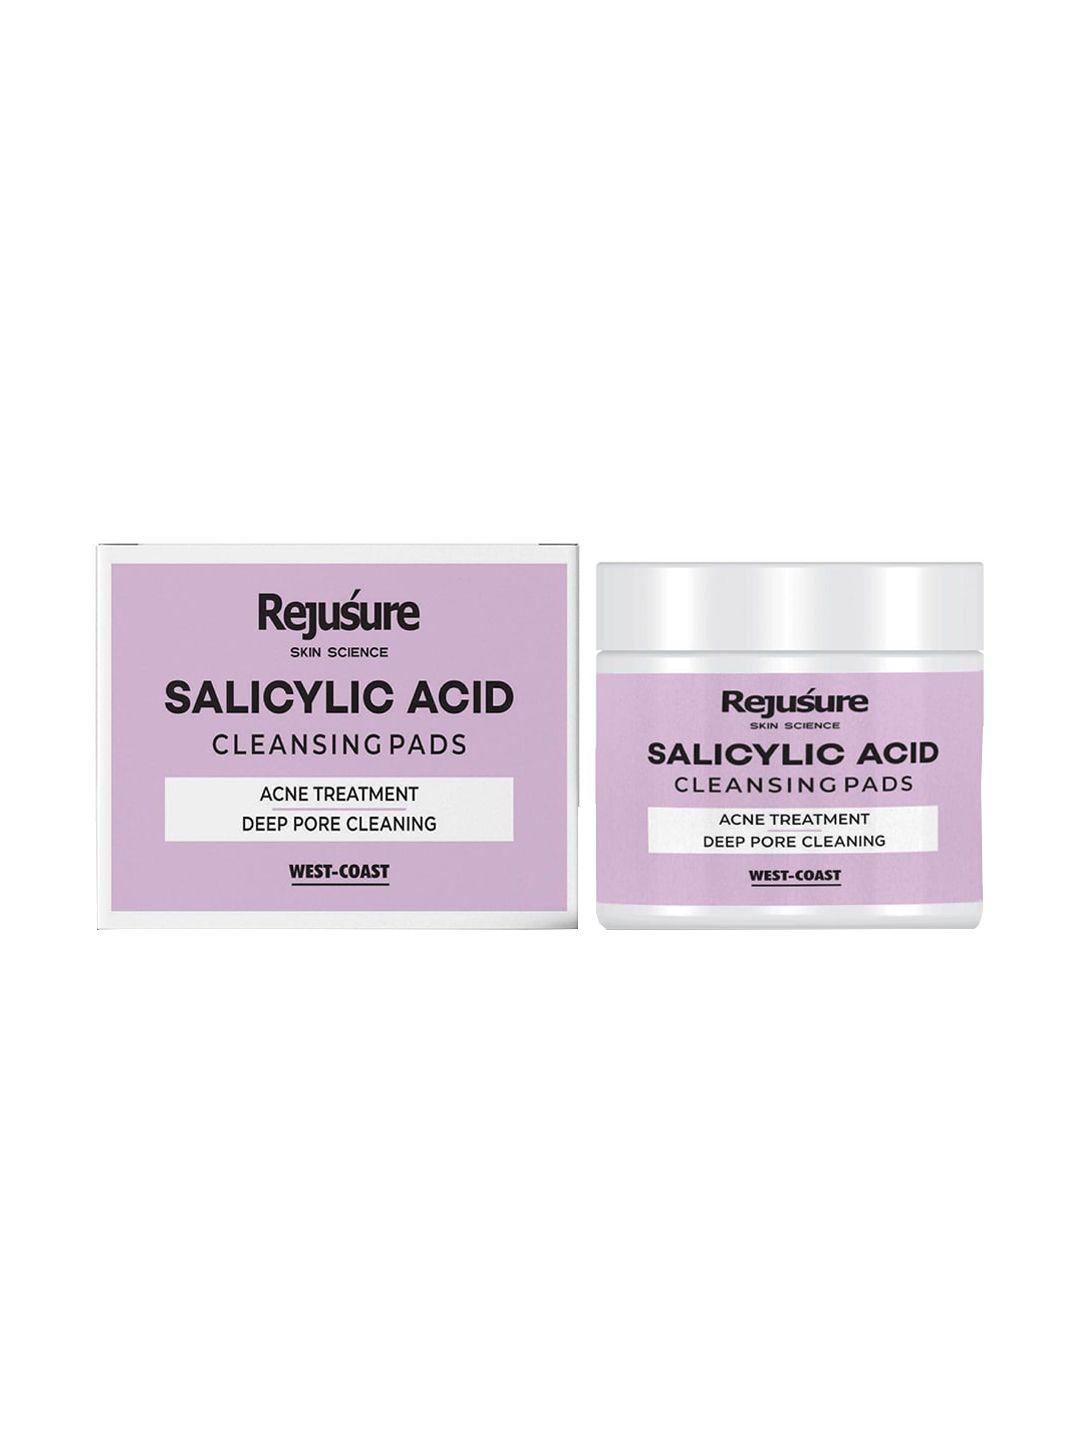 rejusure salicylic acid cleansing pads for deep pore cleansing - 50 pads